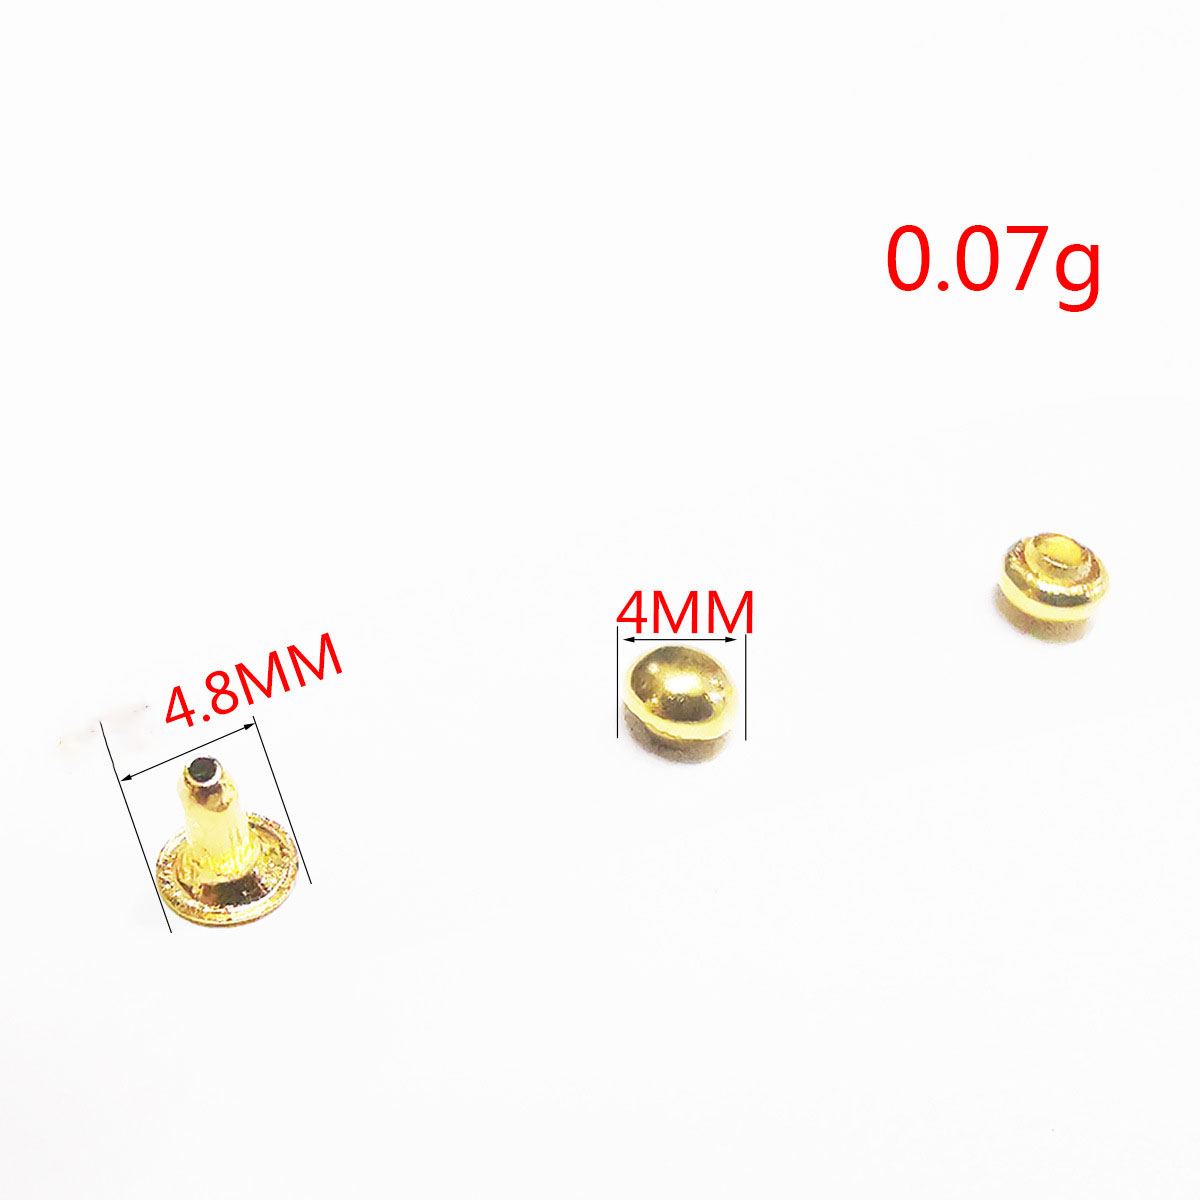 4mm gold